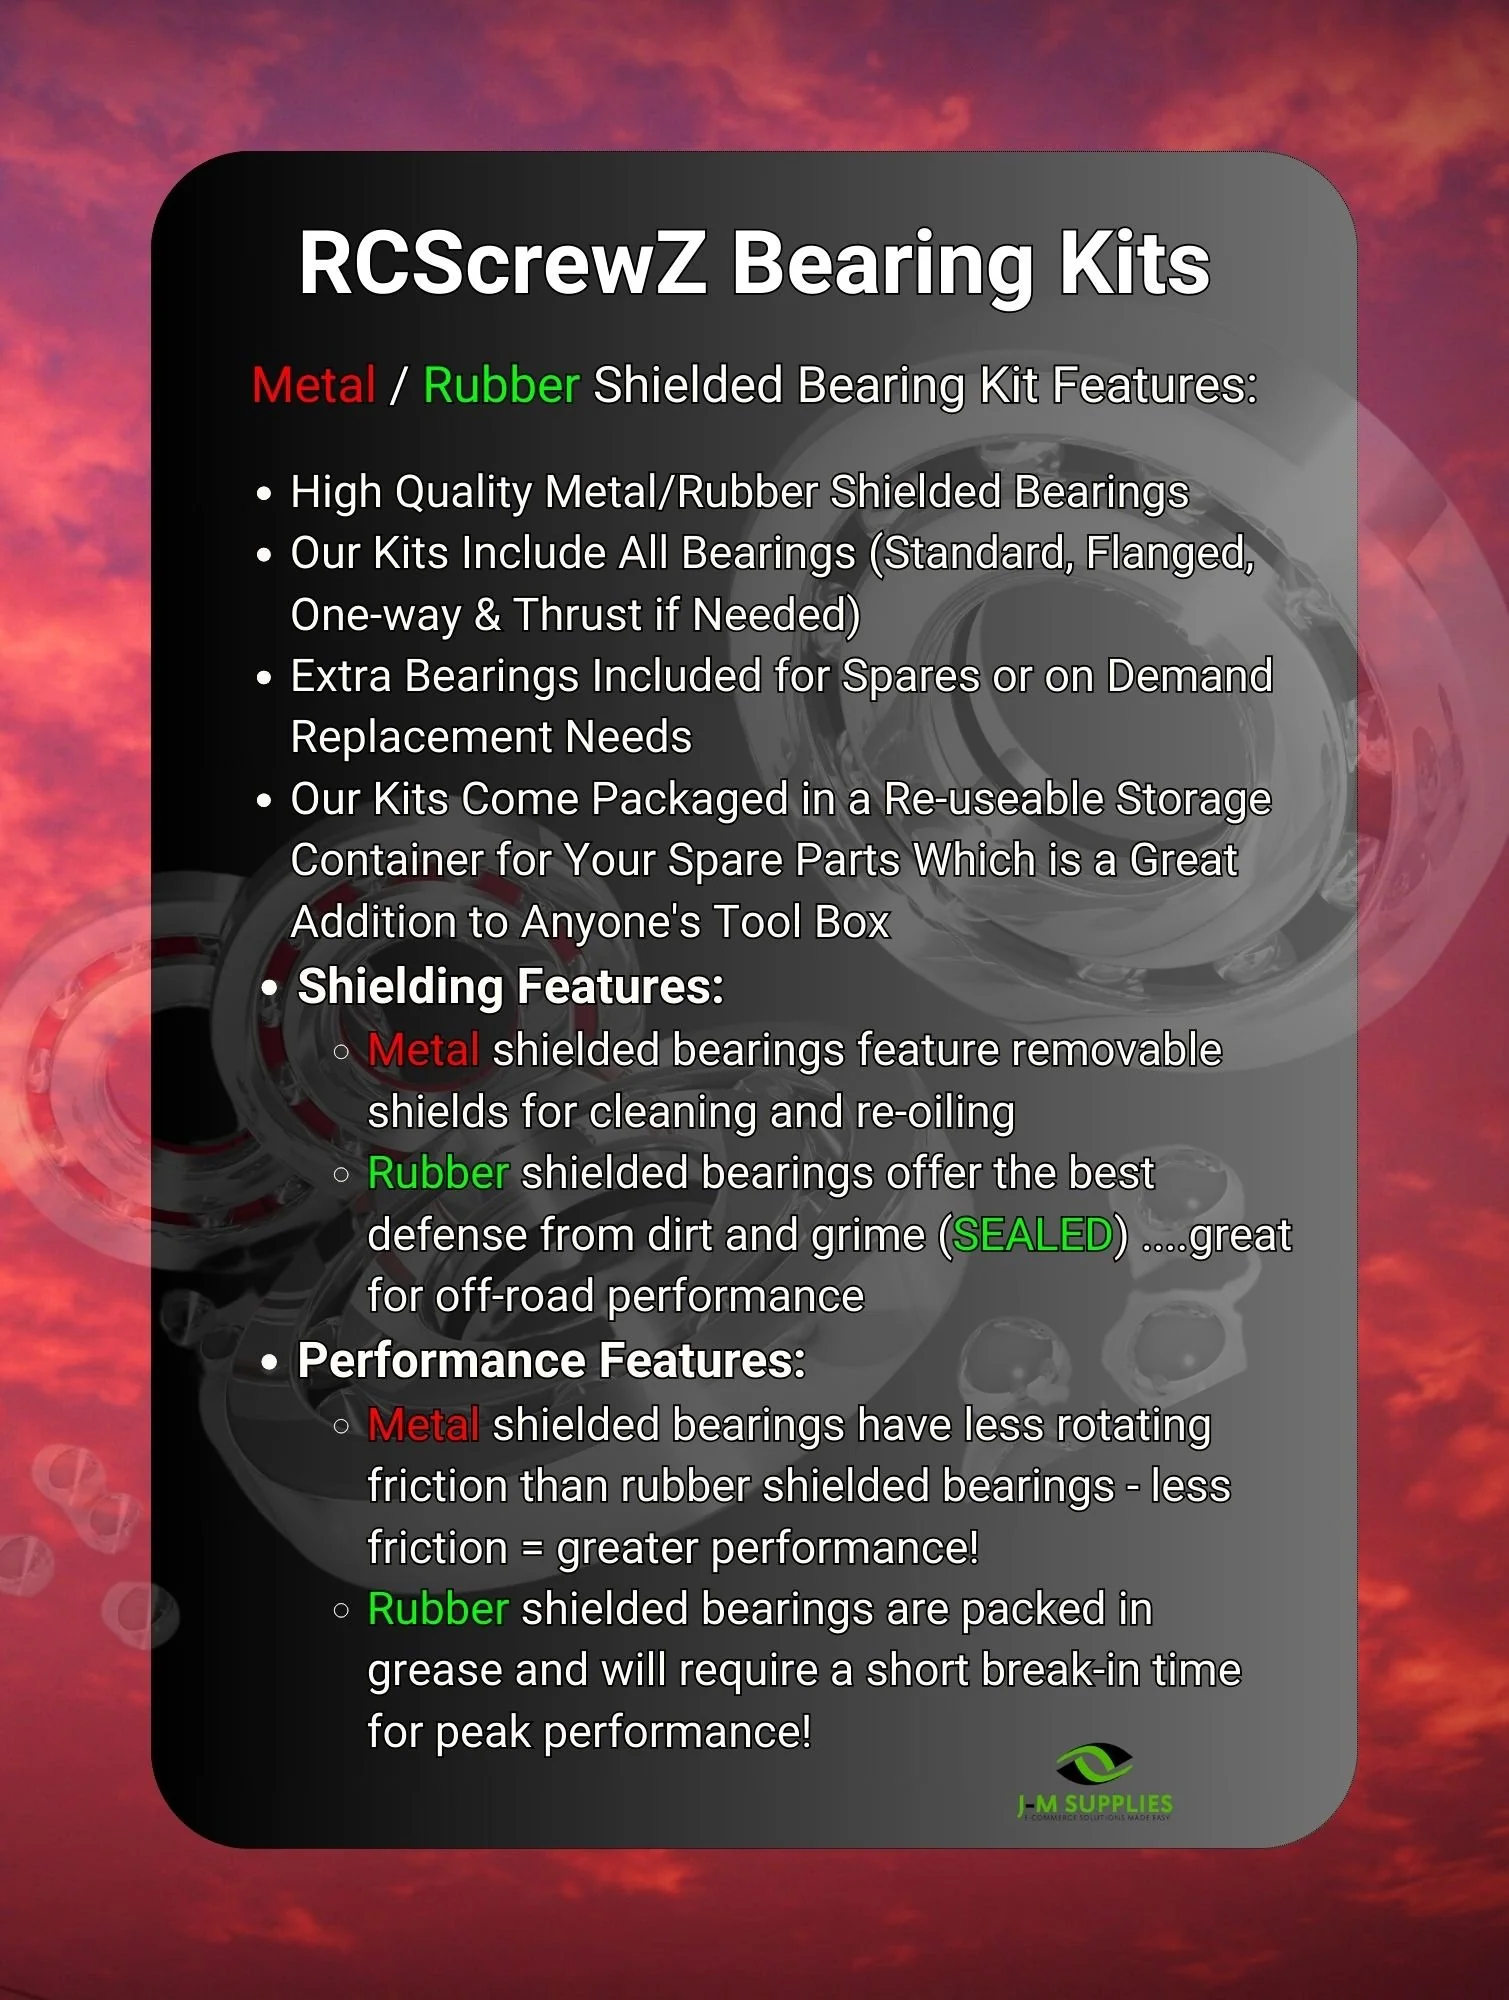 RCScrewZ Rubber Shielded Bearings asc130r for Associated CR12 Tioga Trail RTR - Picture 10 of 12